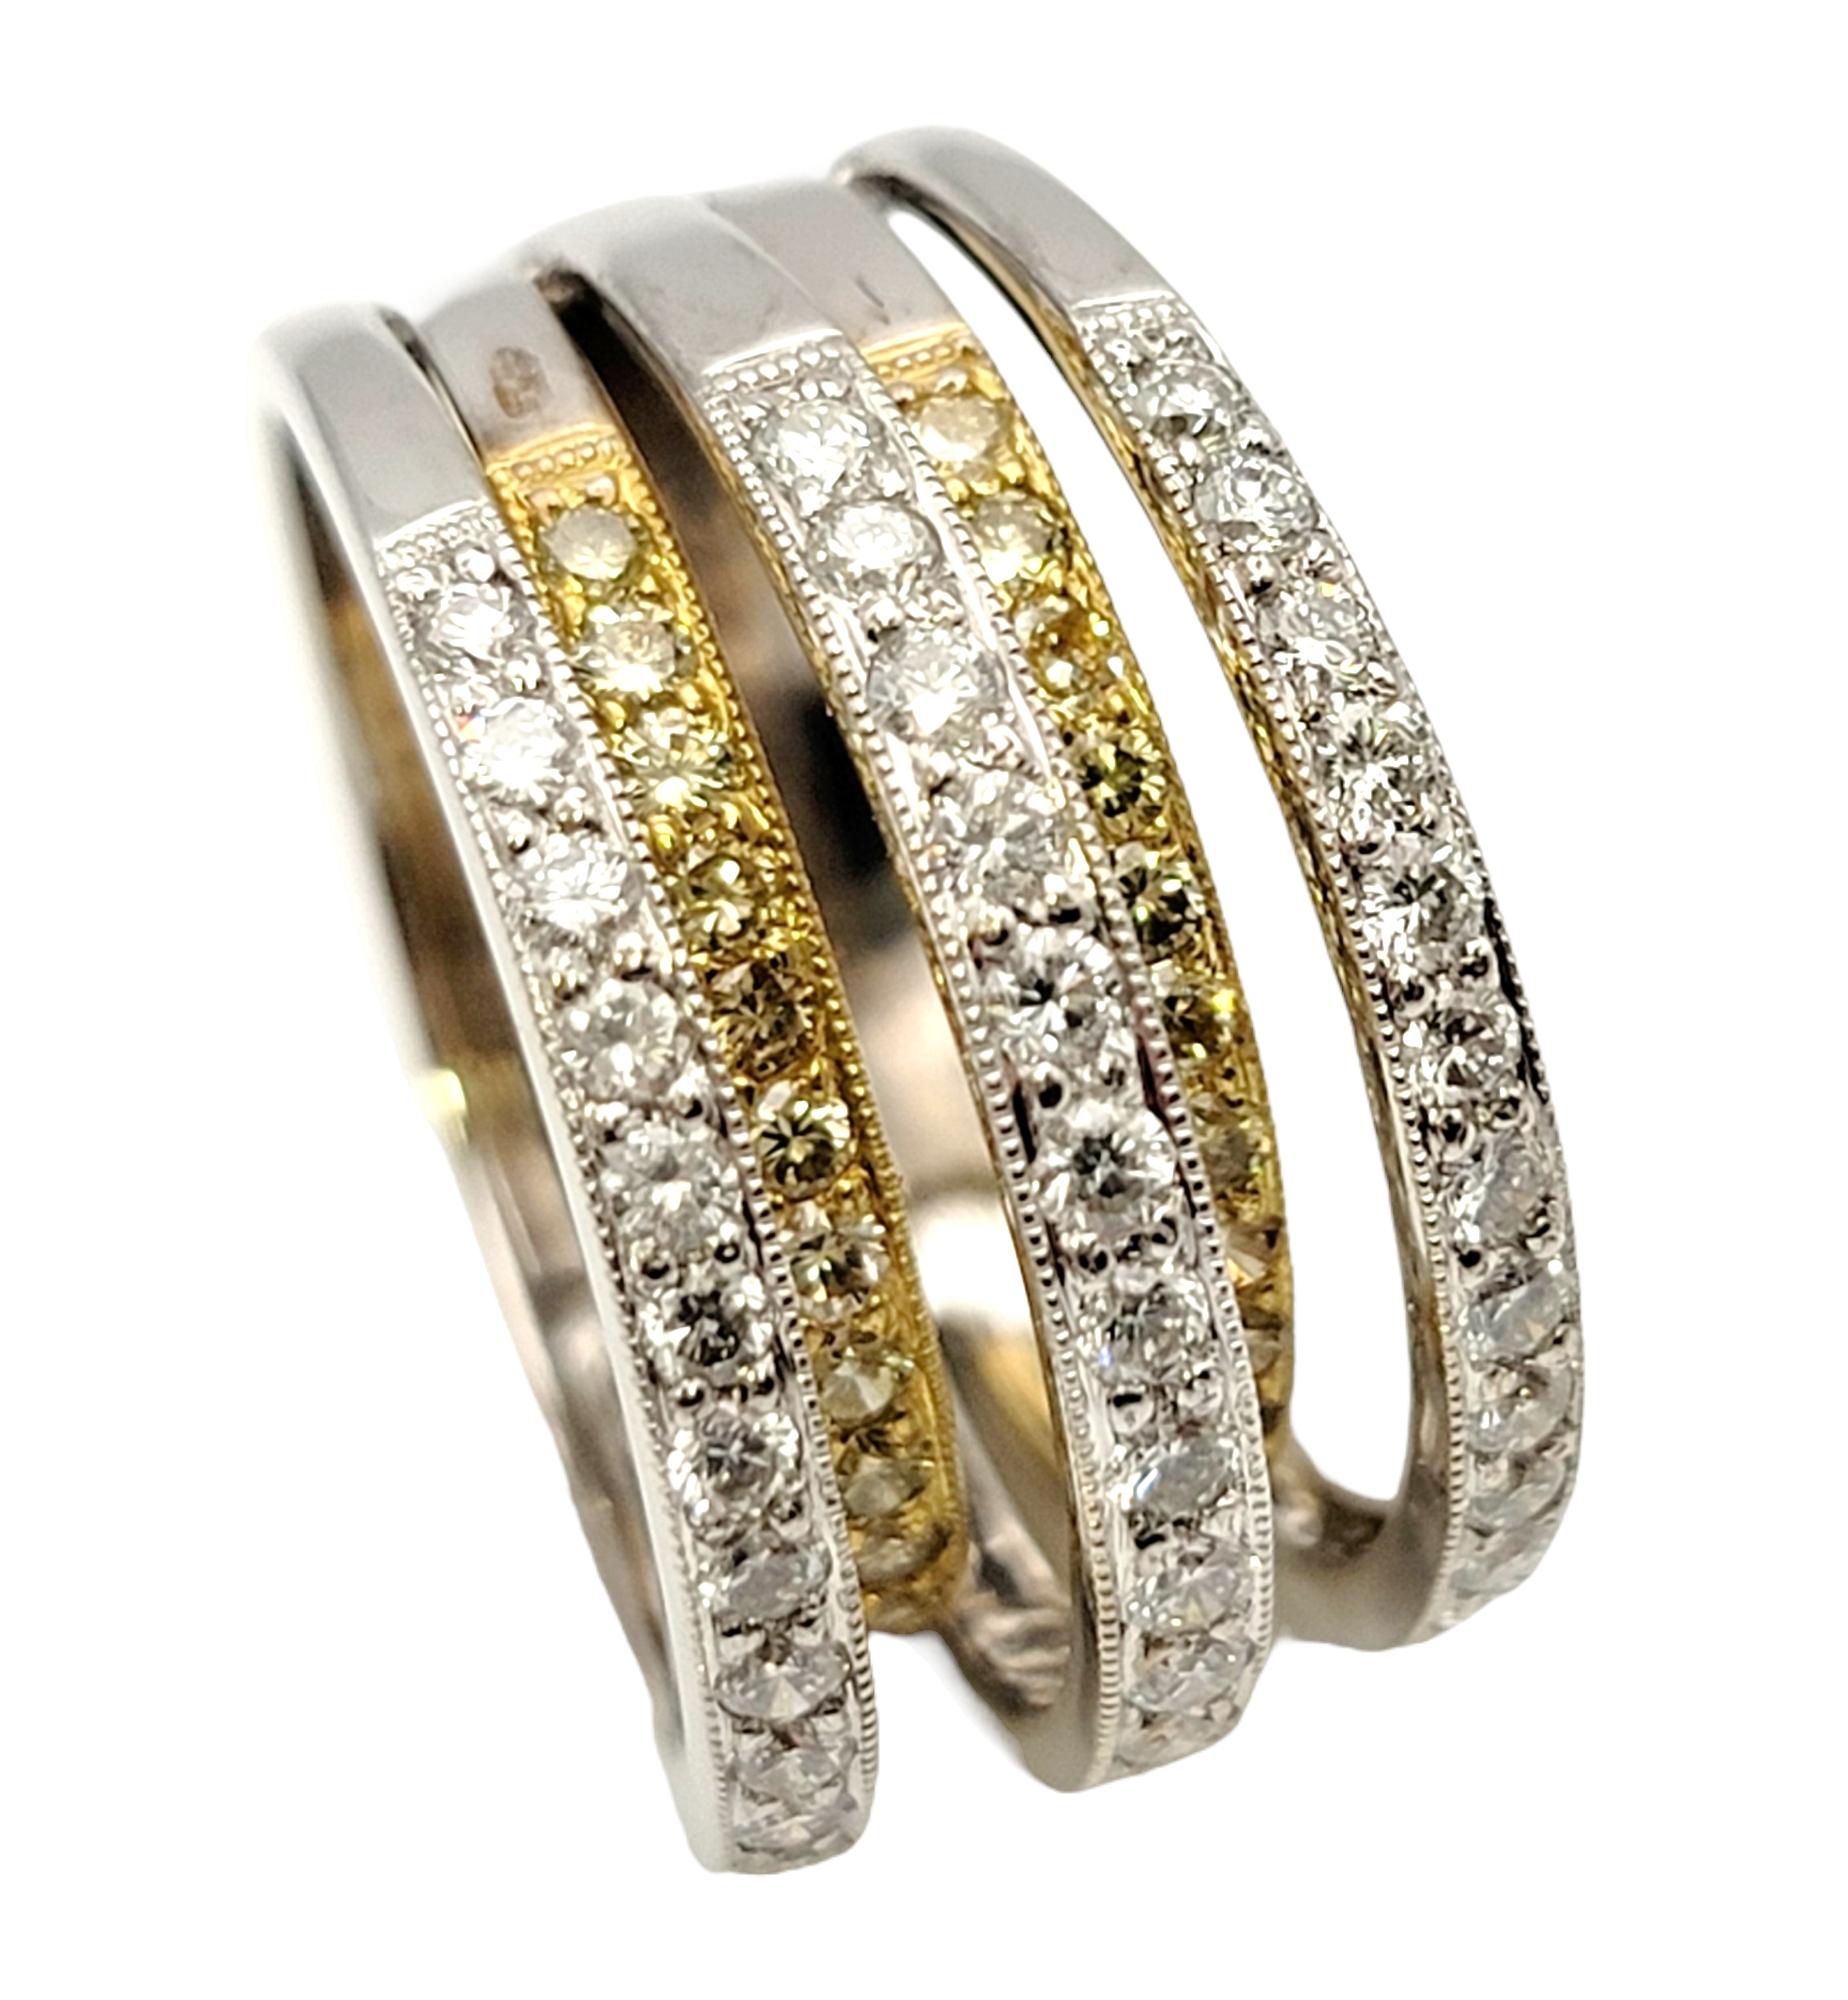 1.42 Carats Total White and Yellow Gold Multi-Row Round Diamond Band Ring In Good Condition For Sale In Scottsdale, AZ